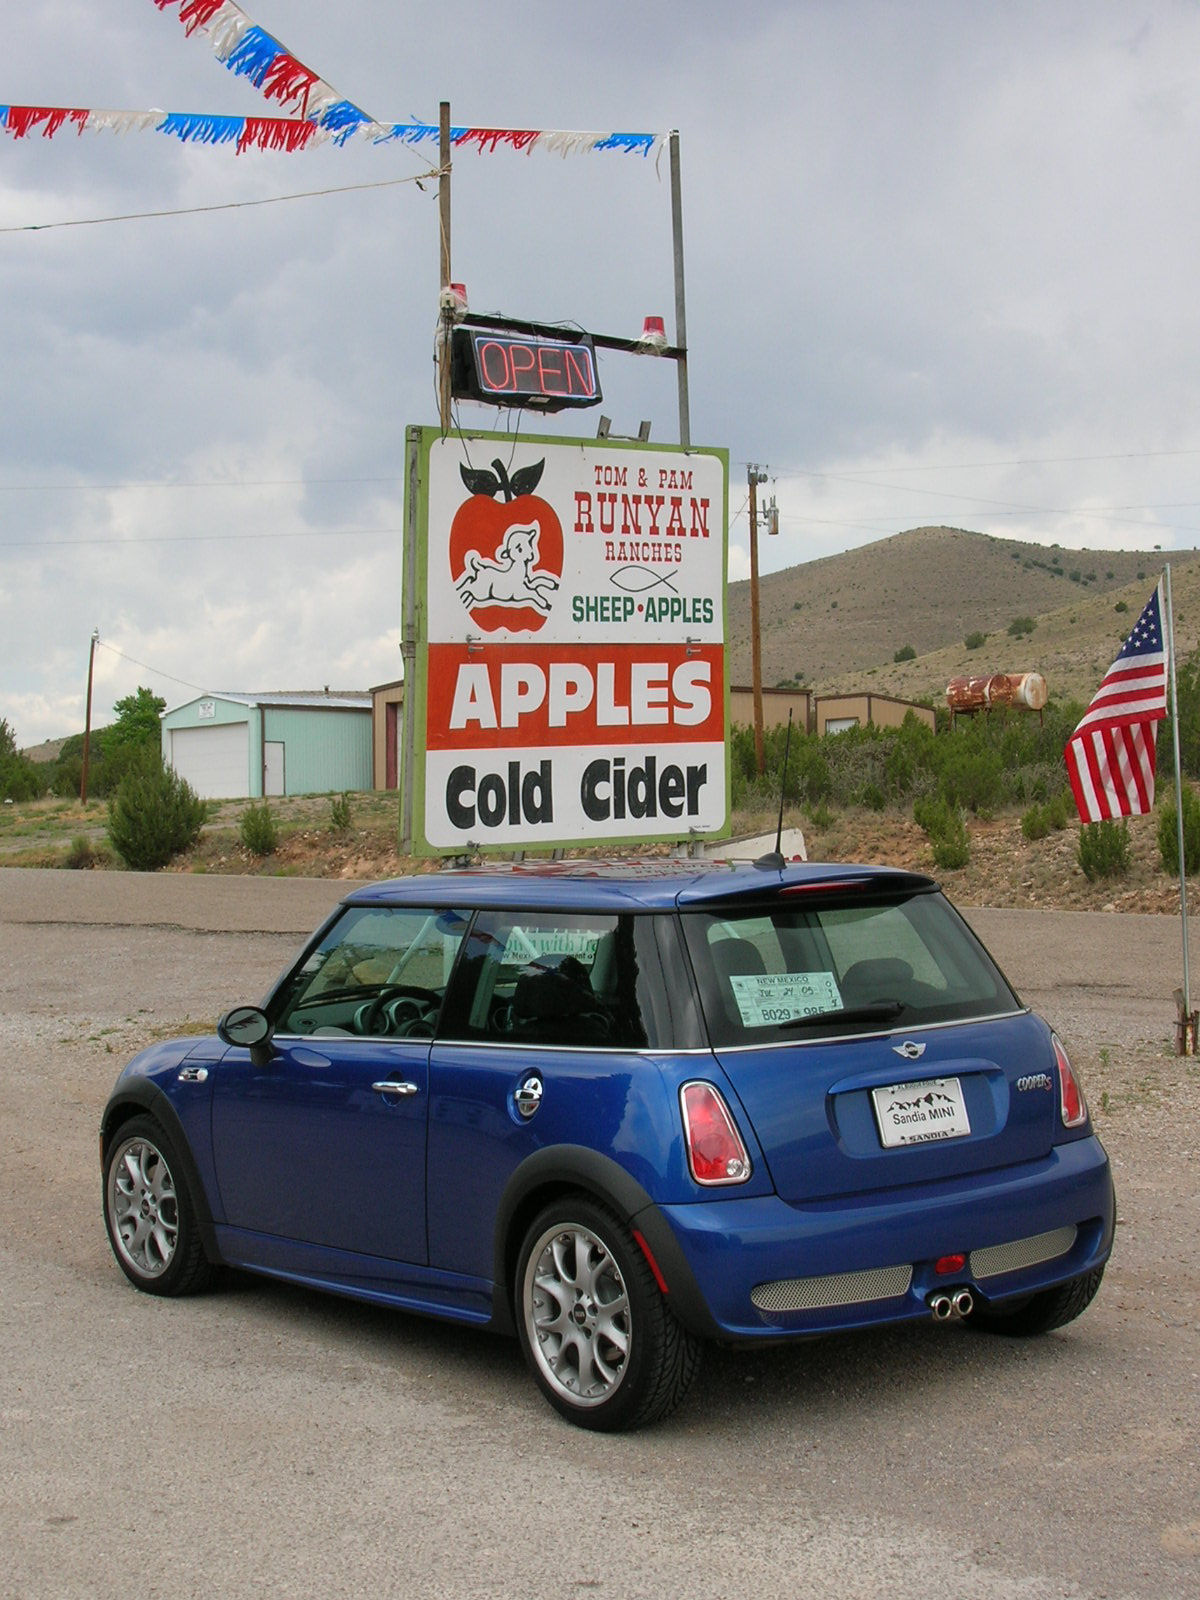 A fruit and pee stop on the way to CloudCroft, NM